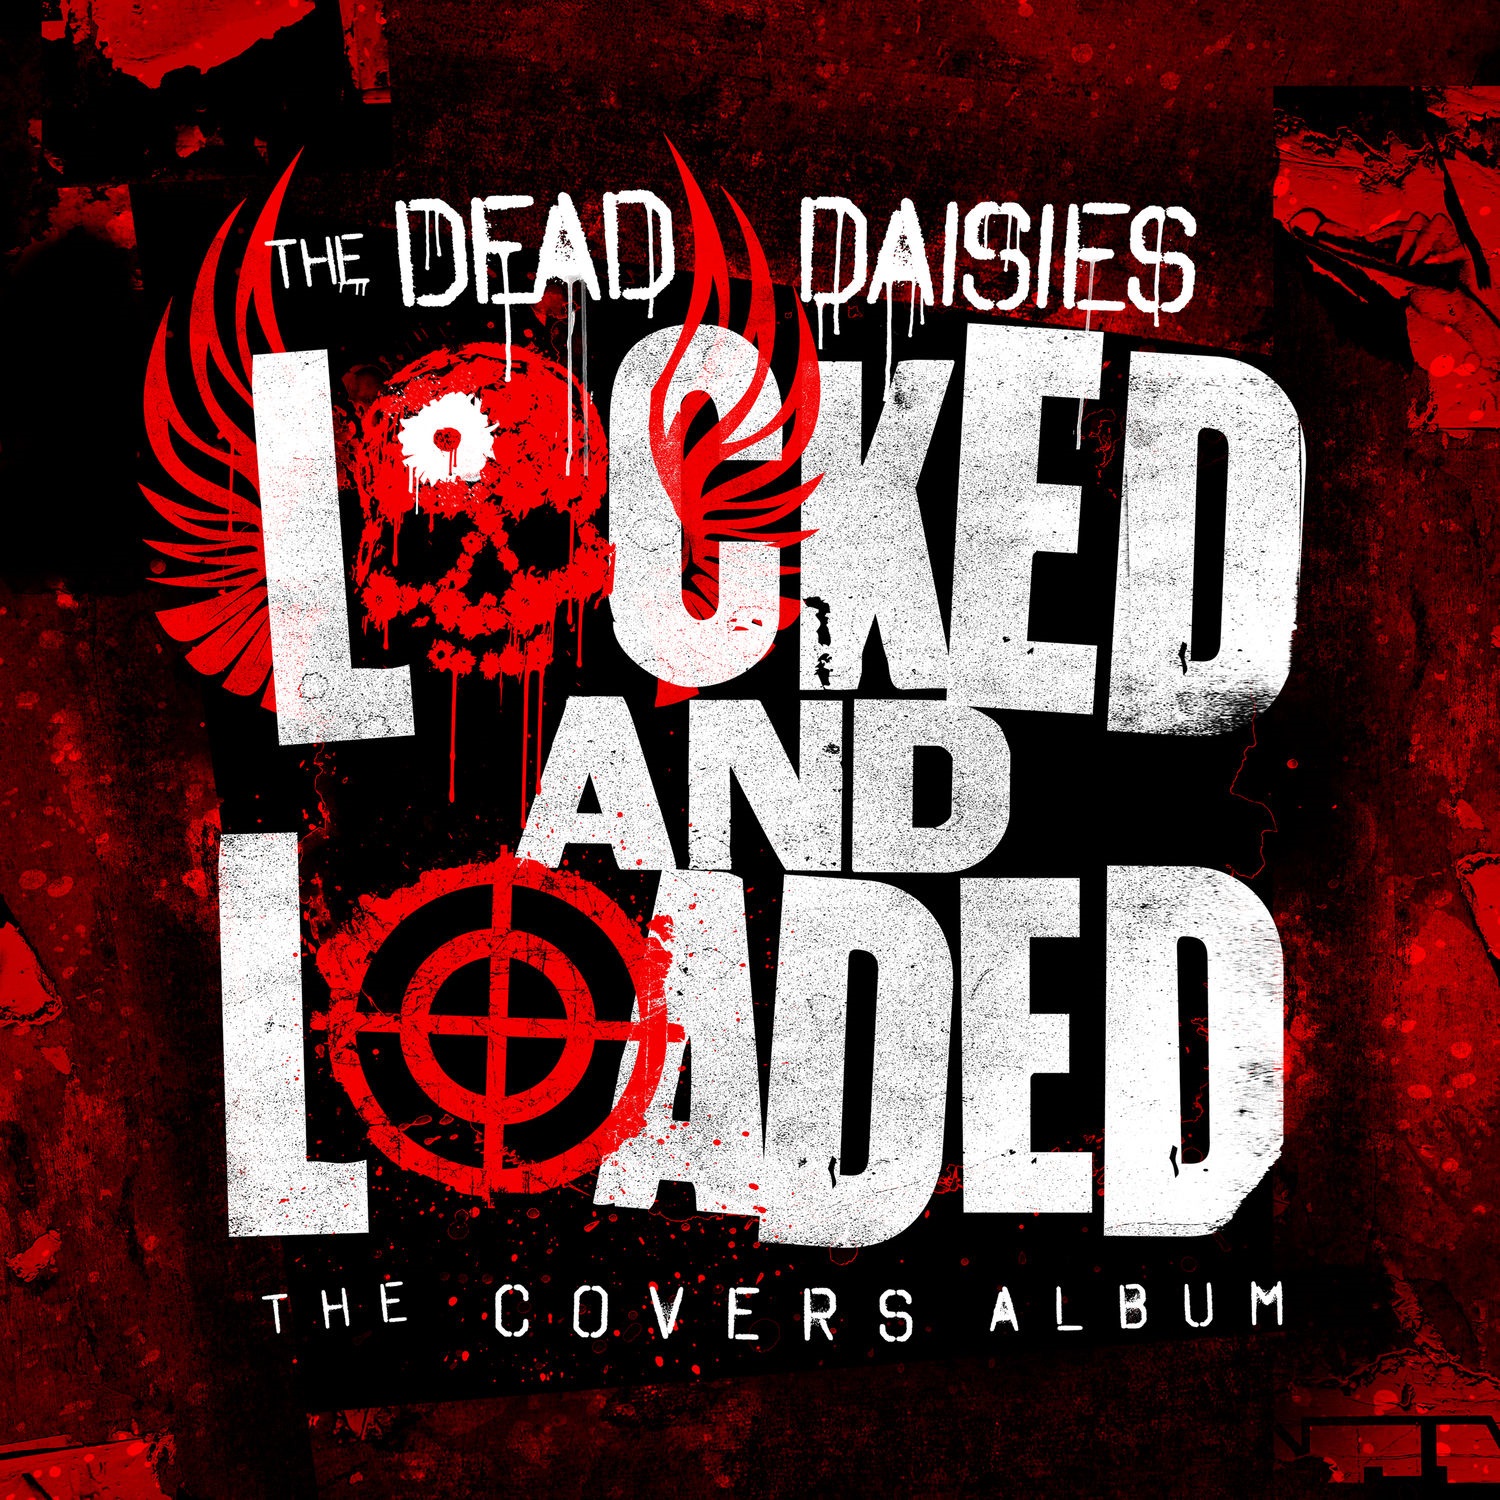 The Dead Daisies - Locked and Loaded (The Covers Album) (2019) [FLAC 24bit/44,1kHz]